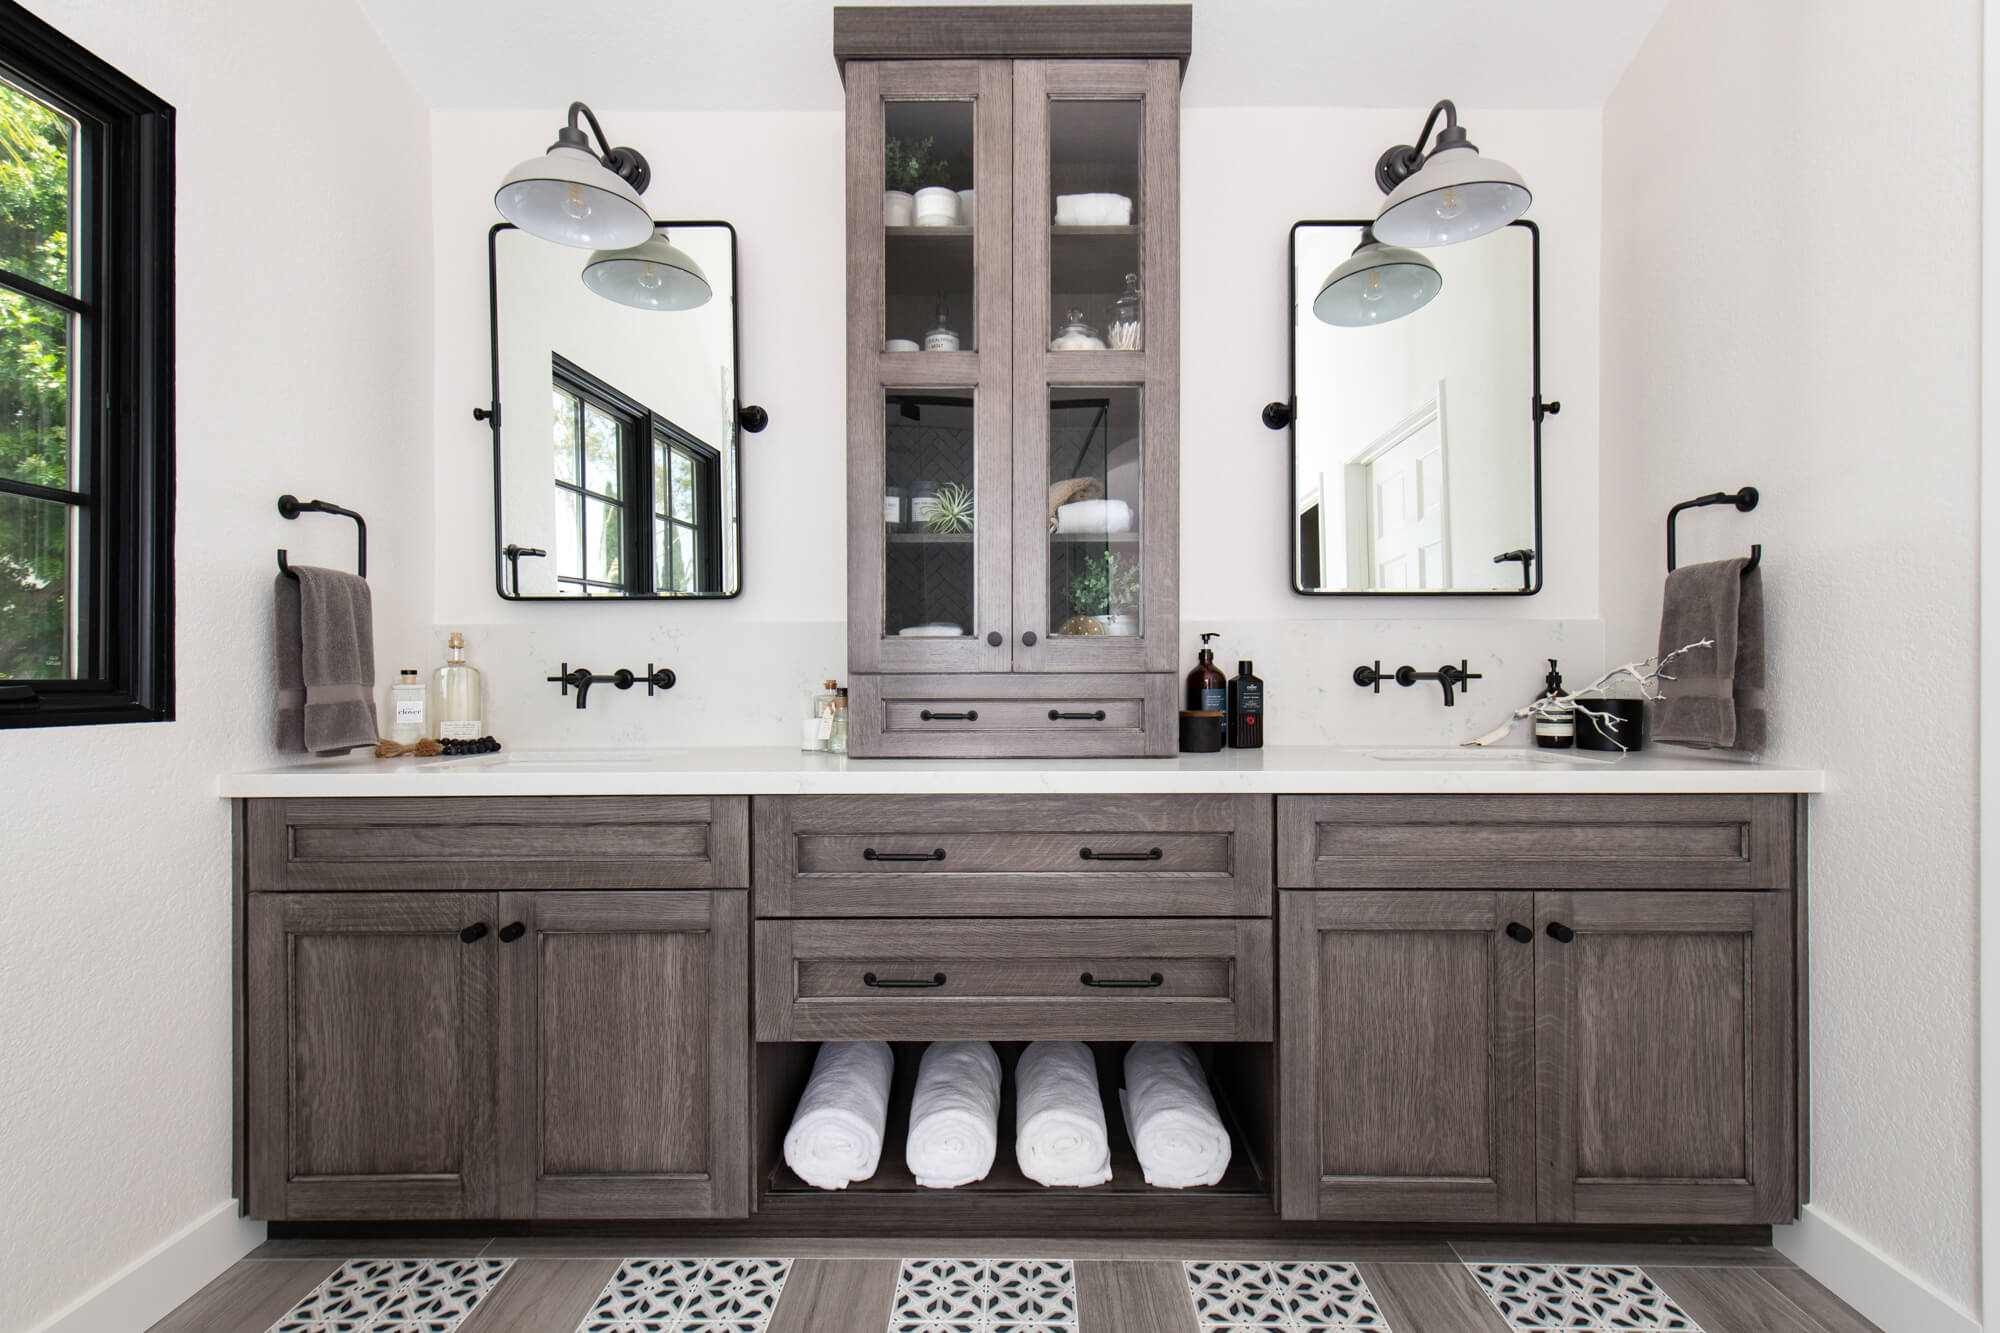 Dual Vanity Remodel With Built in Open Shelving for Storing Towels